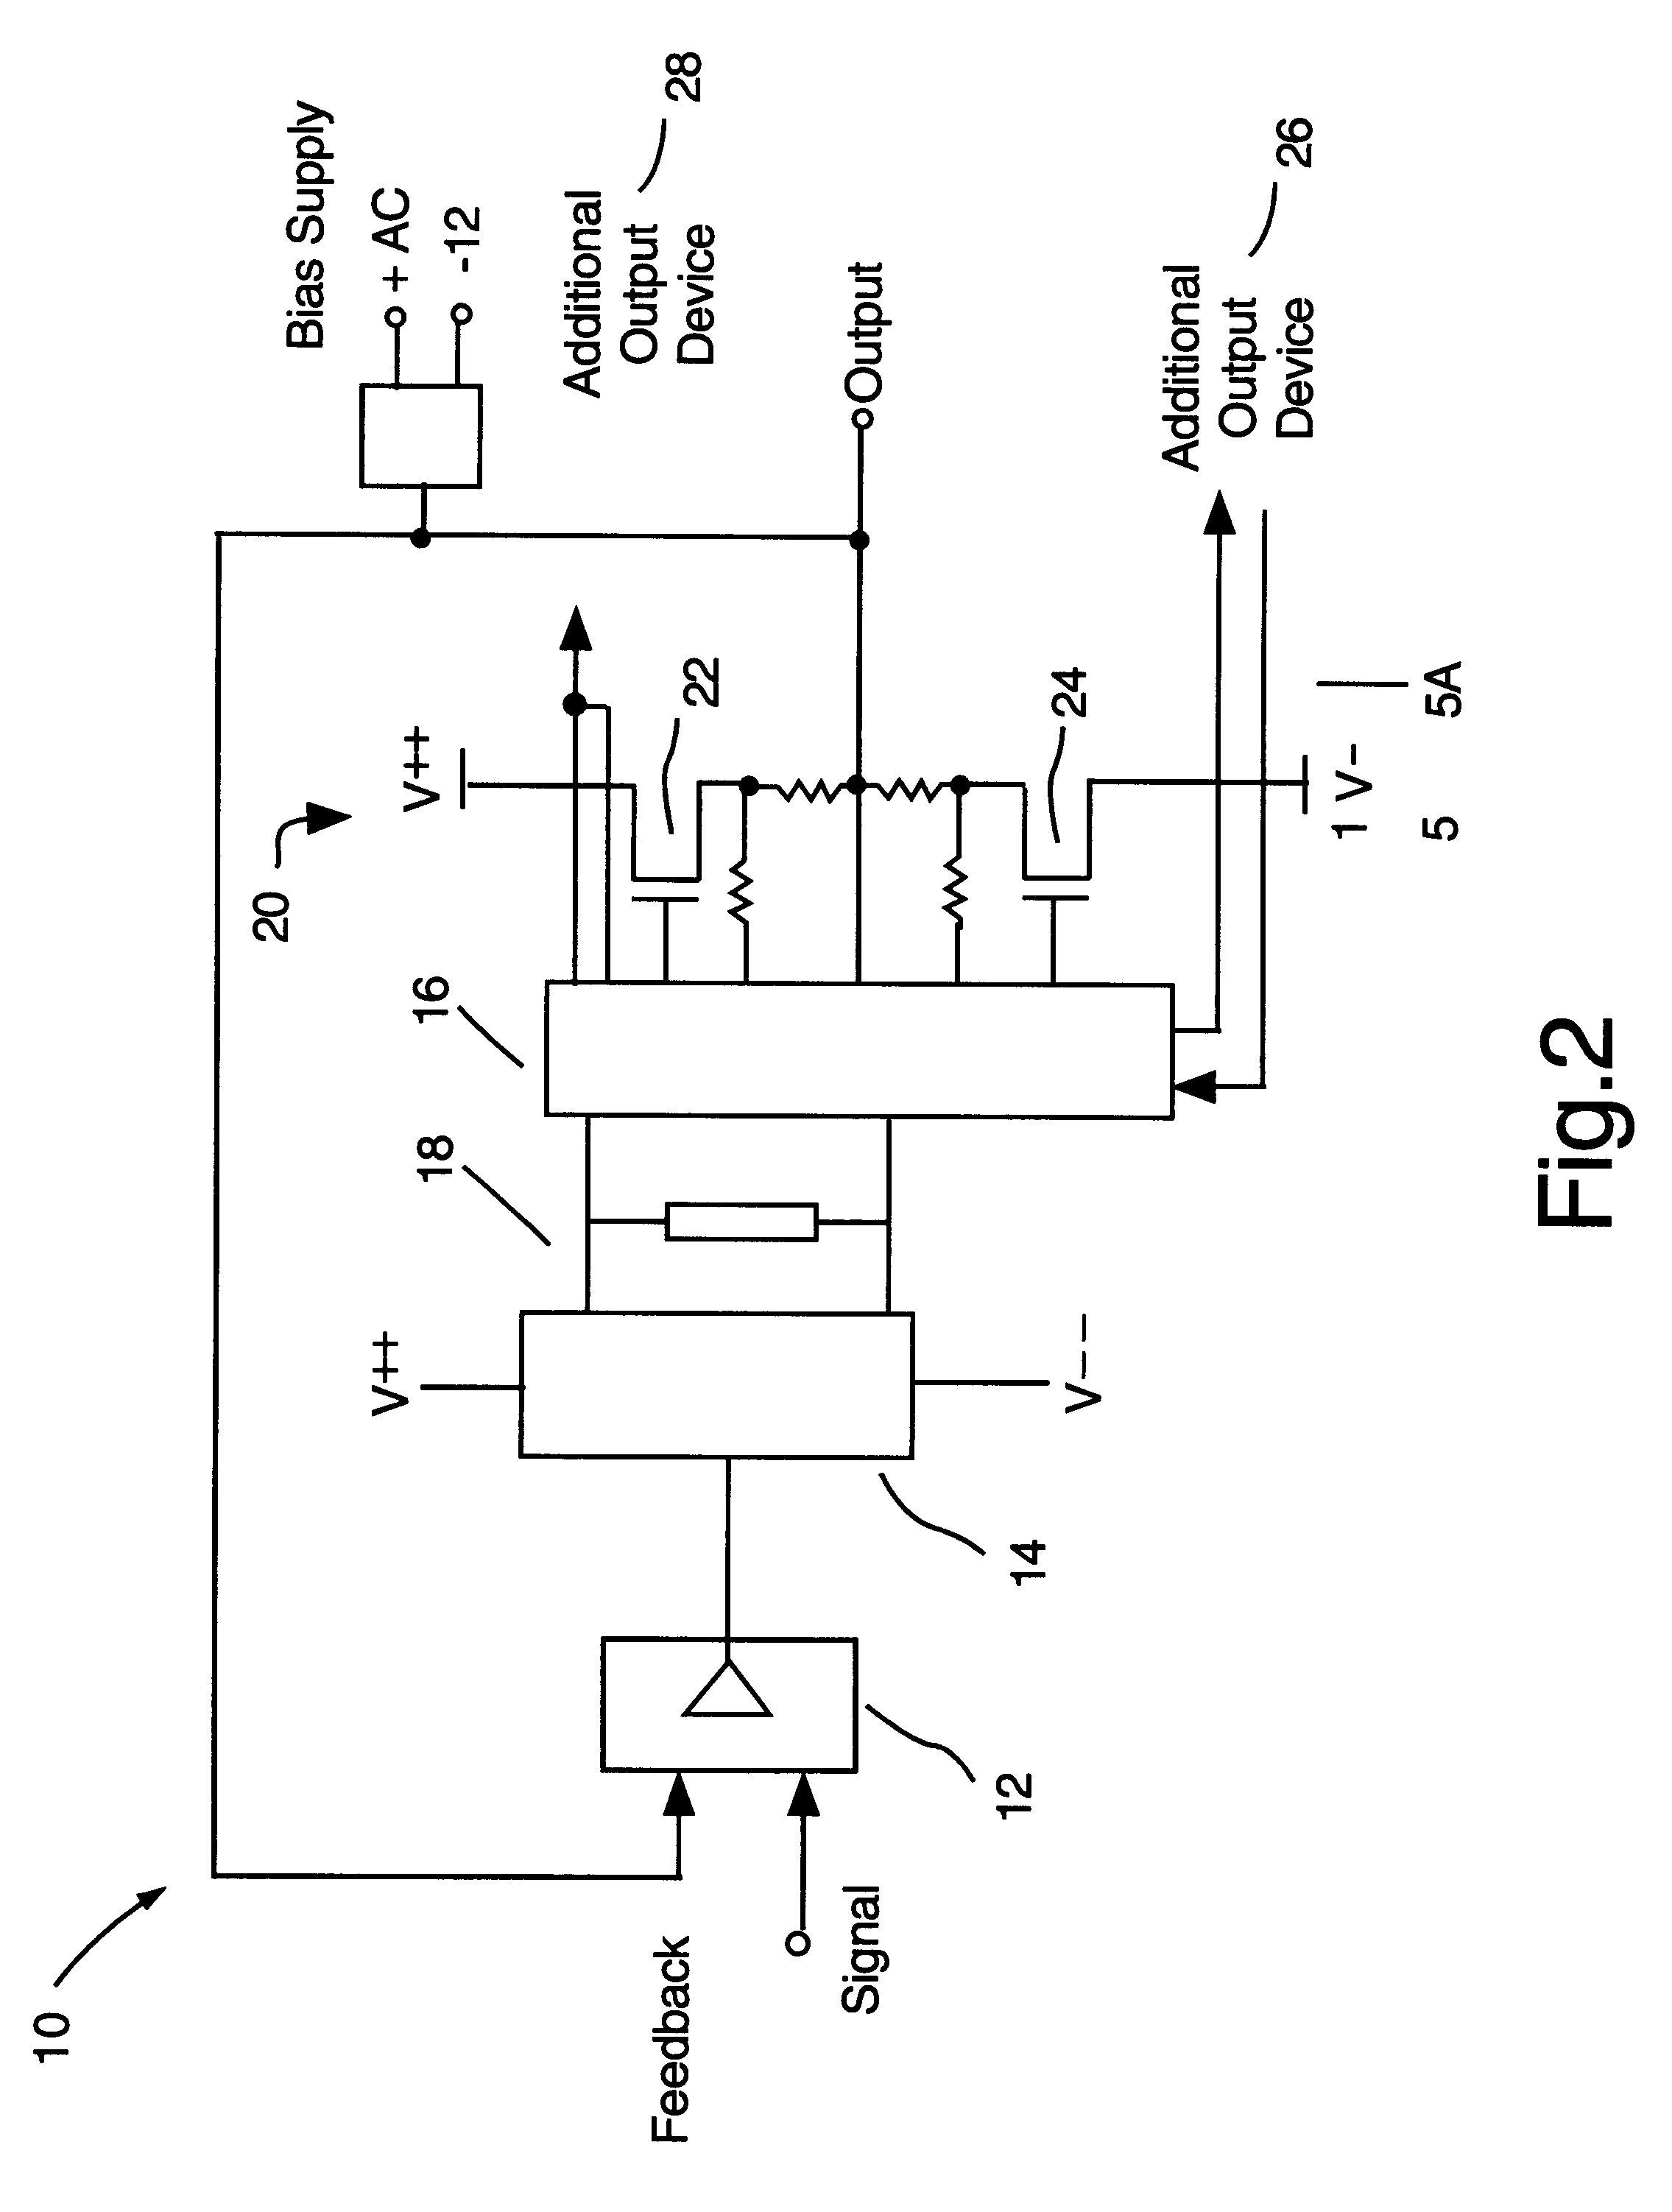 Wide bandwidth, current sharing, MOSFET audio power amplifier with multiple feedback loops